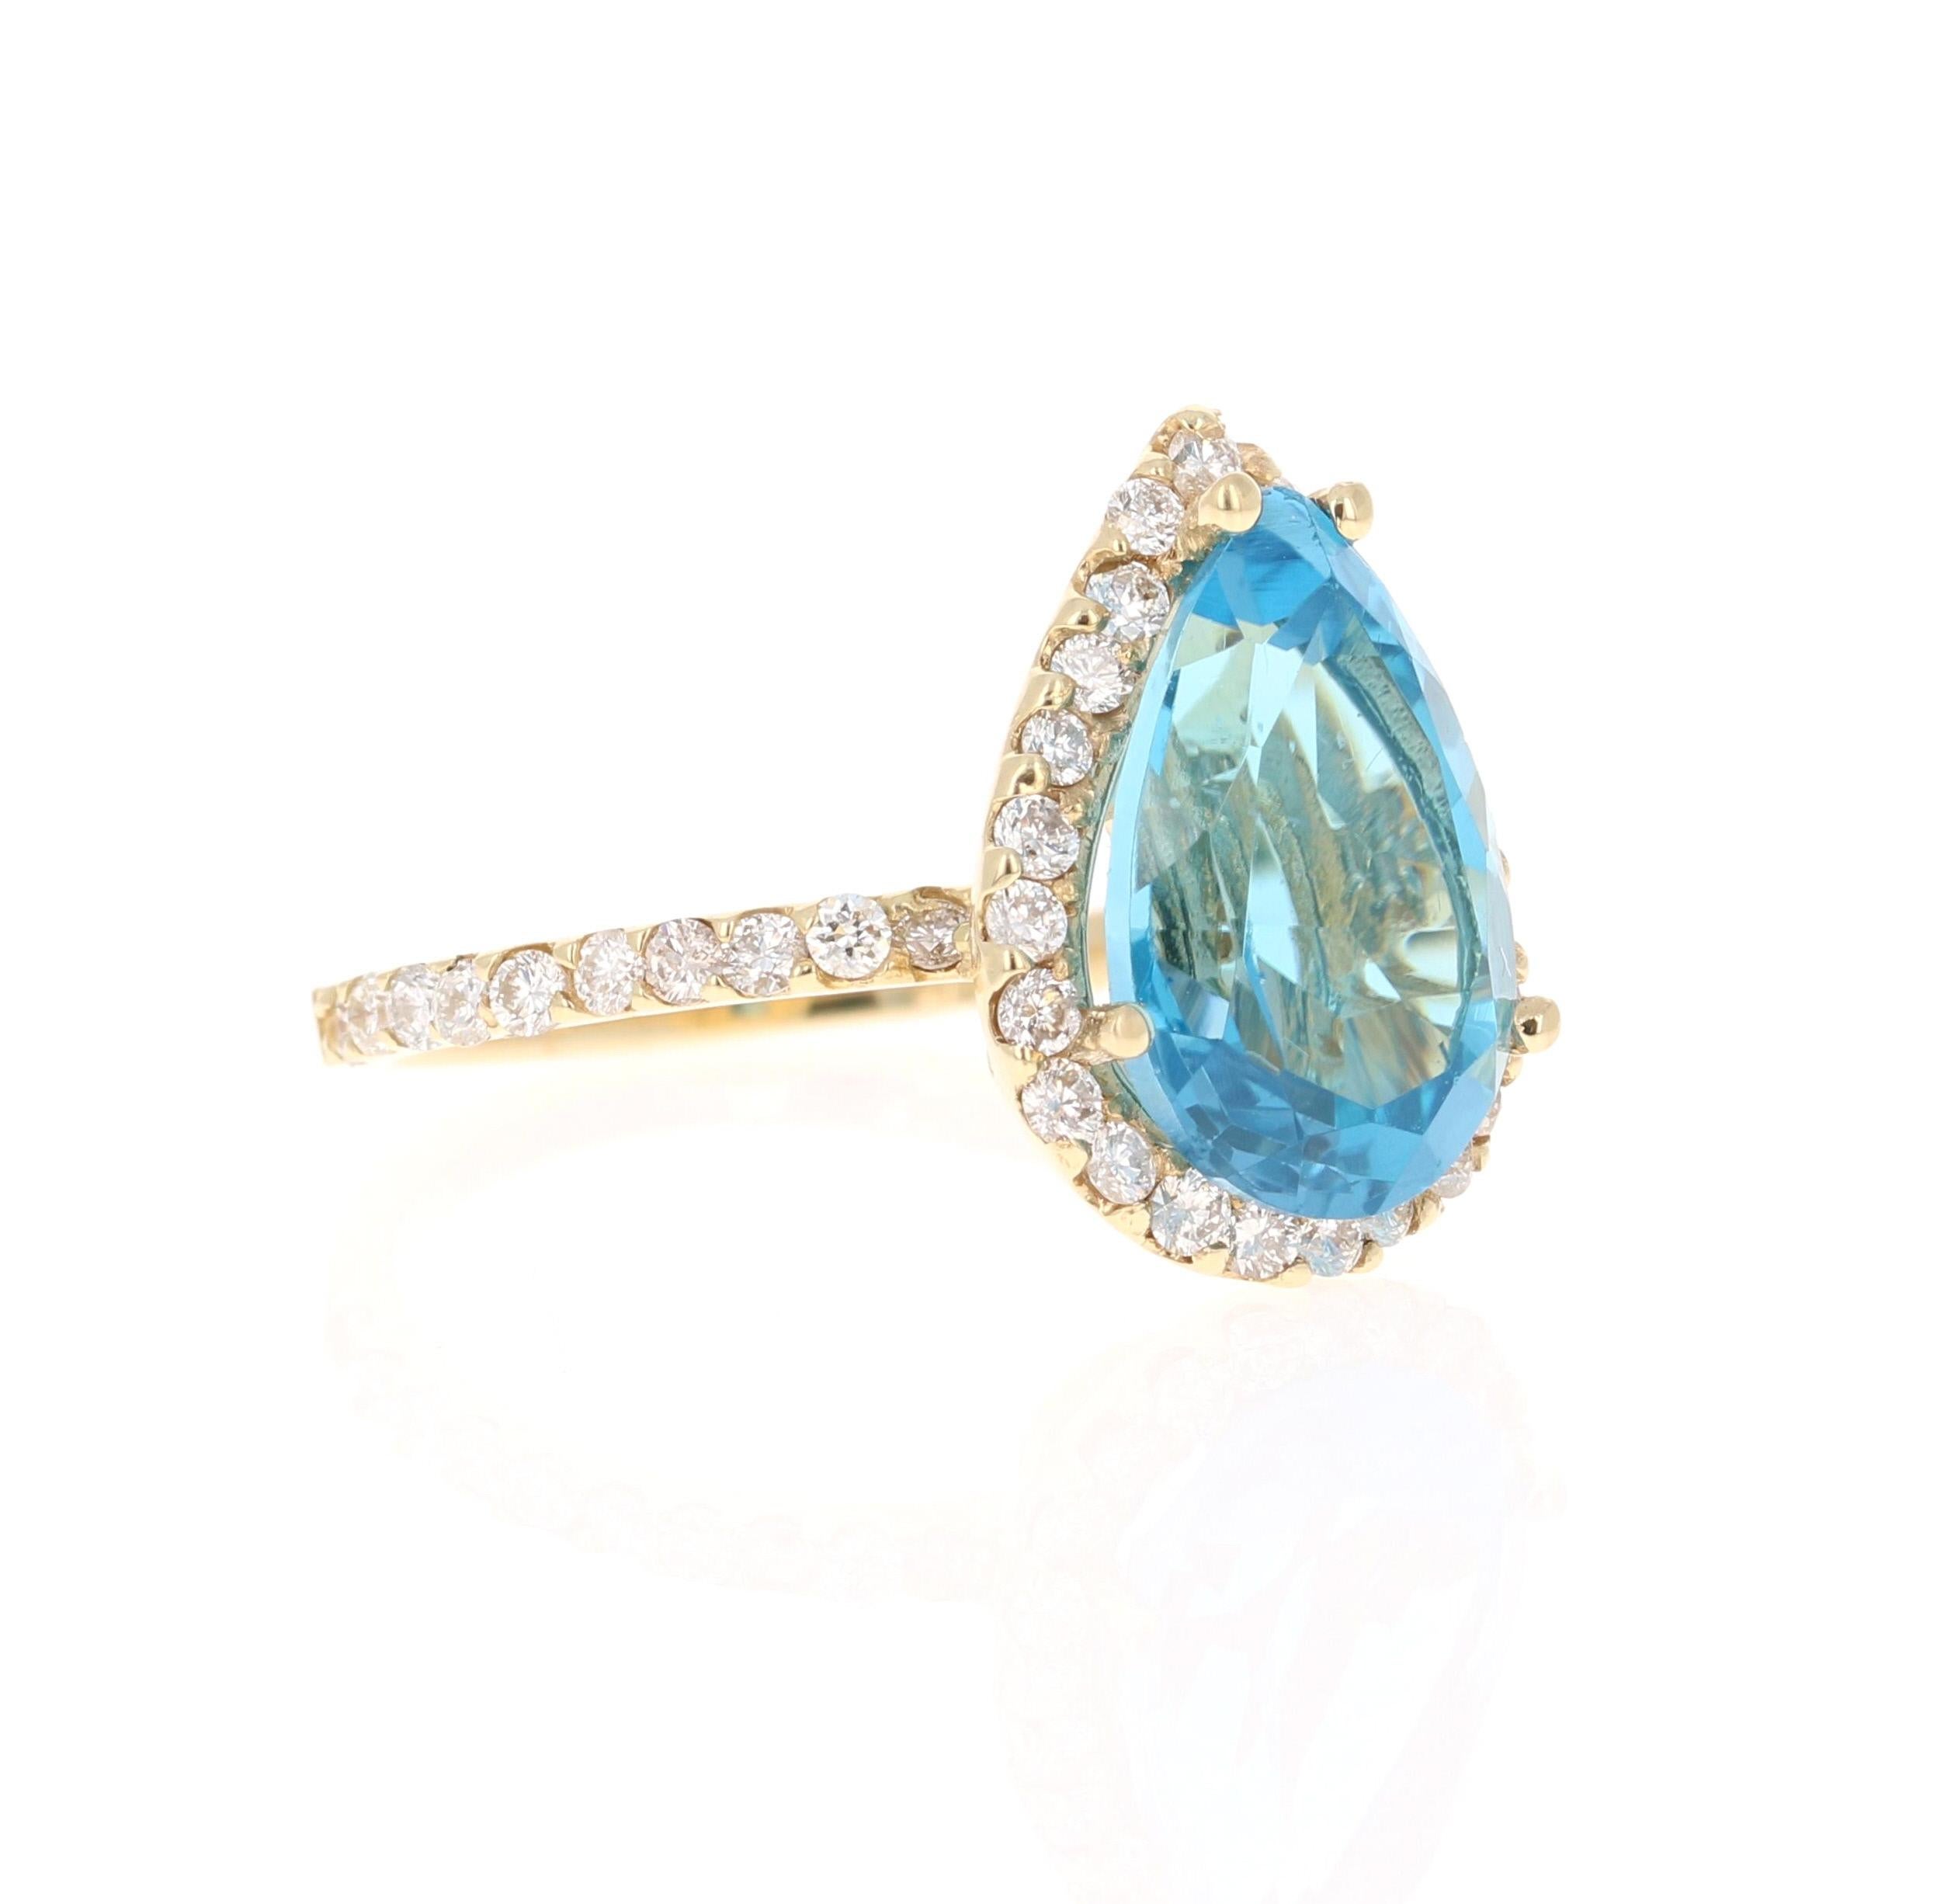 This ring has a beautiful Pear Cut Blue Topaz that weighs 5.84 carats. It also has 45 Round Cut Diamonds that weigh 0.84 carats. The total carat weight of the ring is 6.68 carats. The clarity and color of the diamonds are SI-F. 

The ring is set in